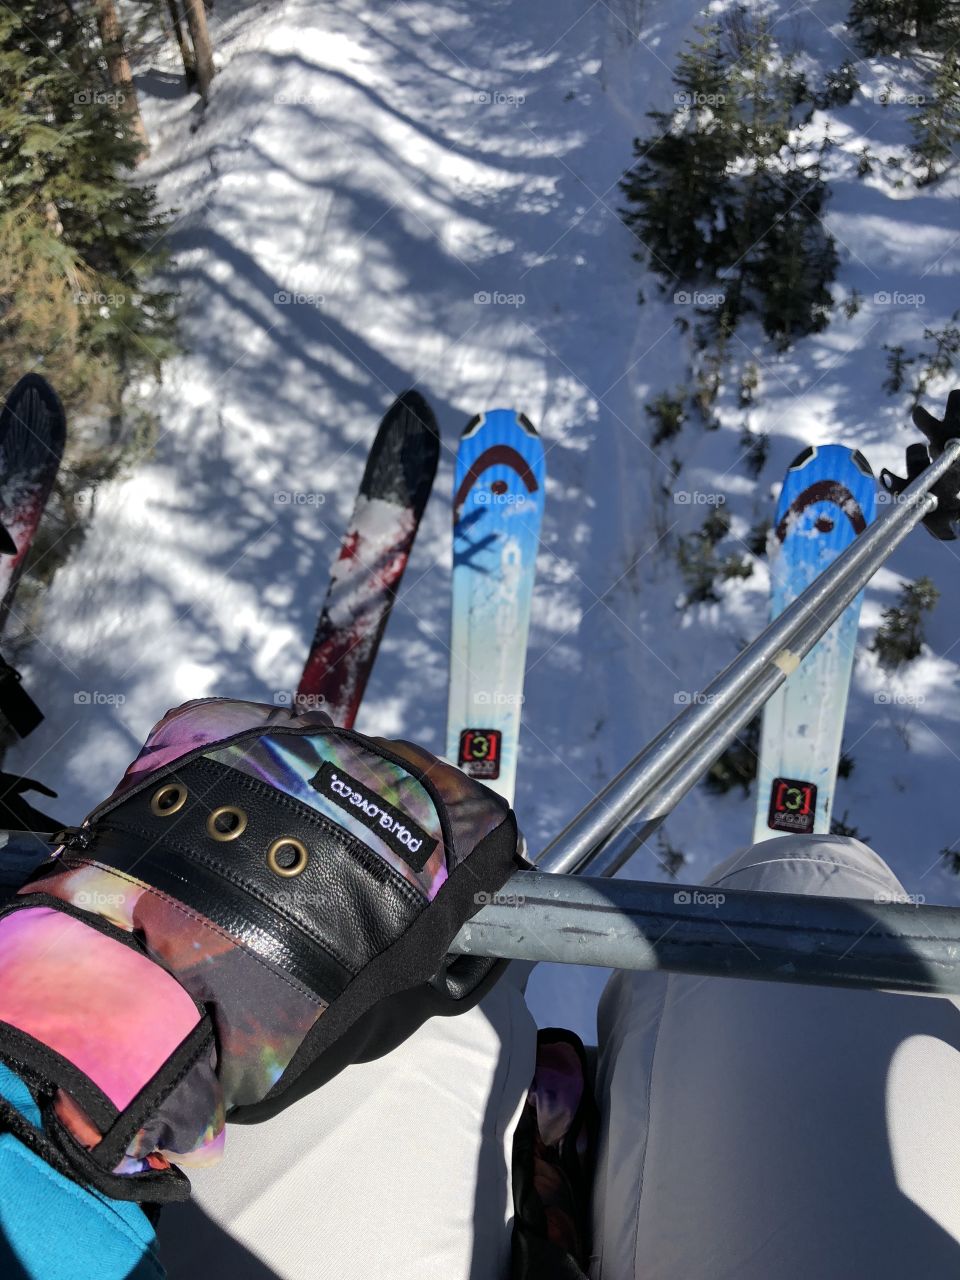 View of poles and skis looking down from the chairlift in winter 